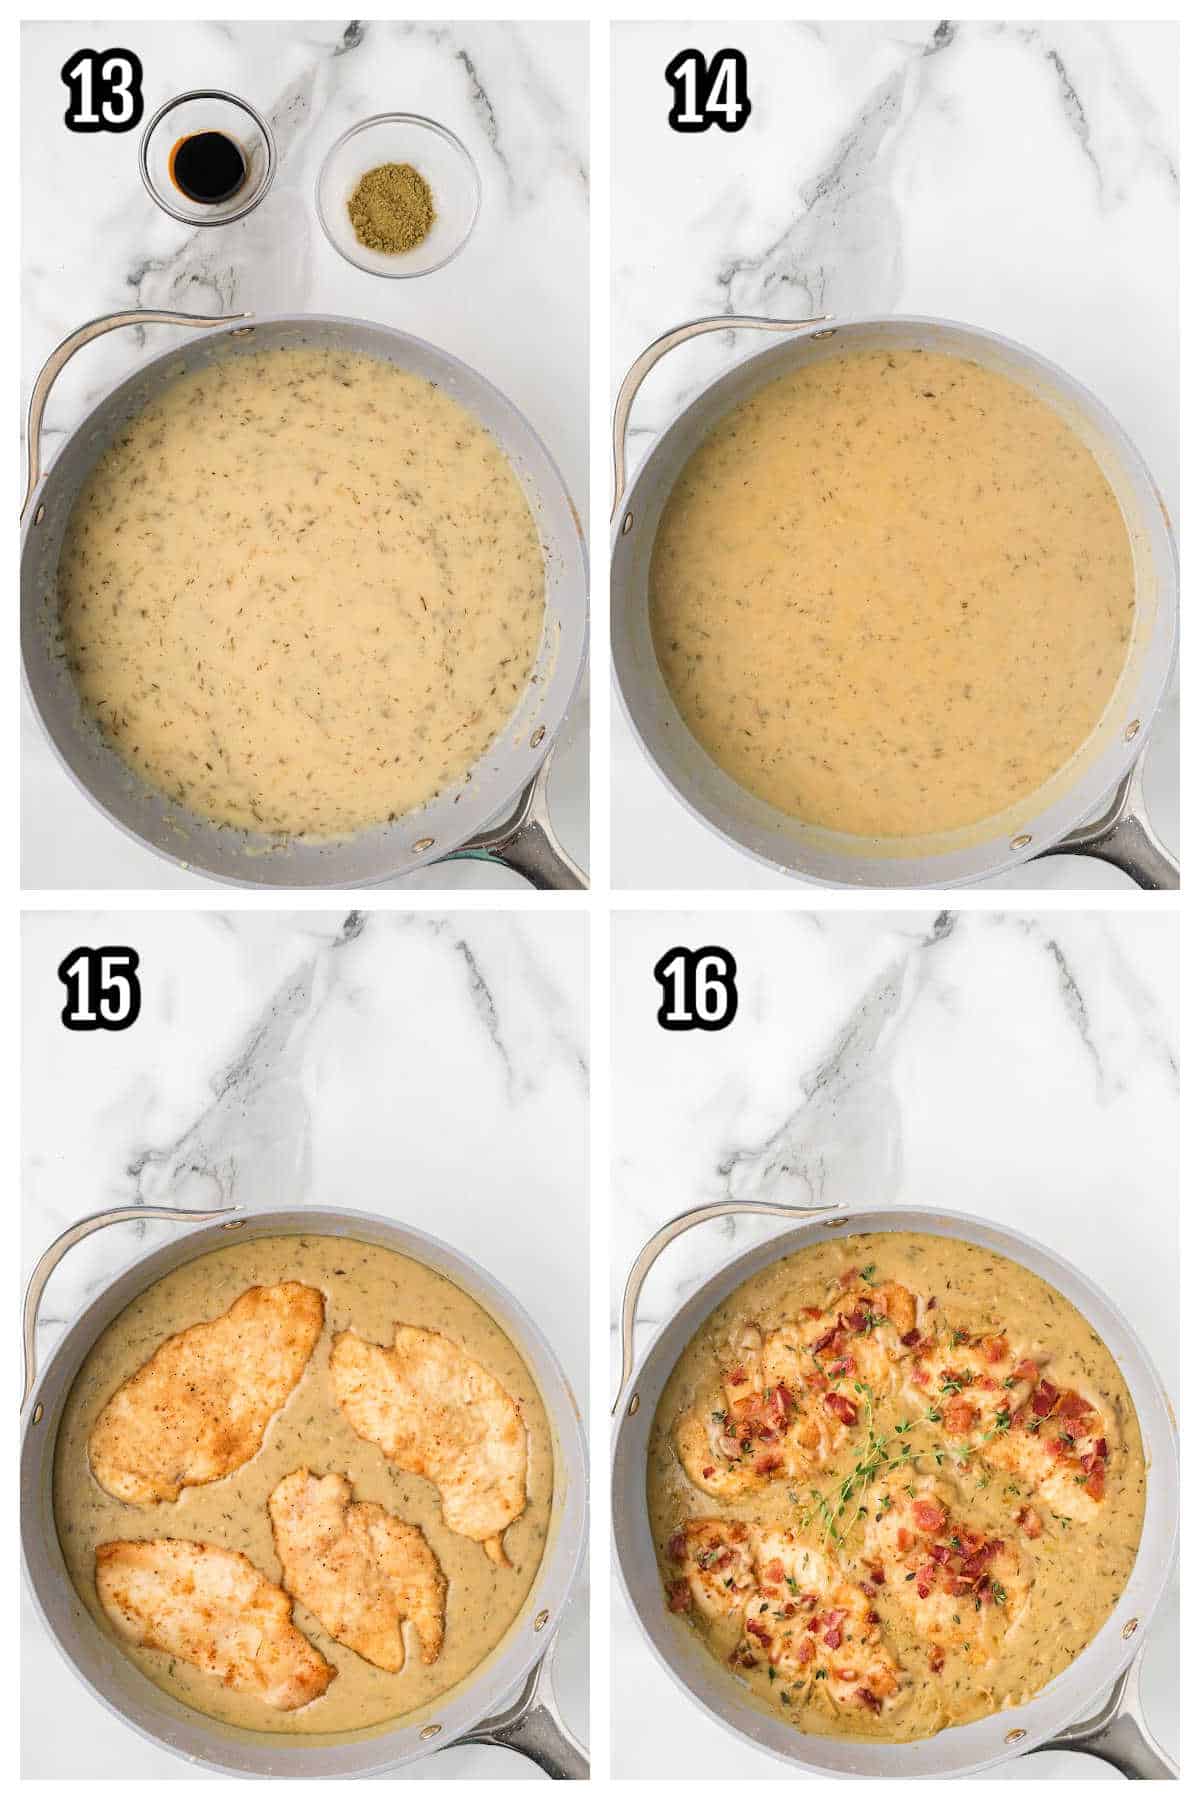 The fourth and final collage shows the steps to finish the chicken in the gravy recipe. 